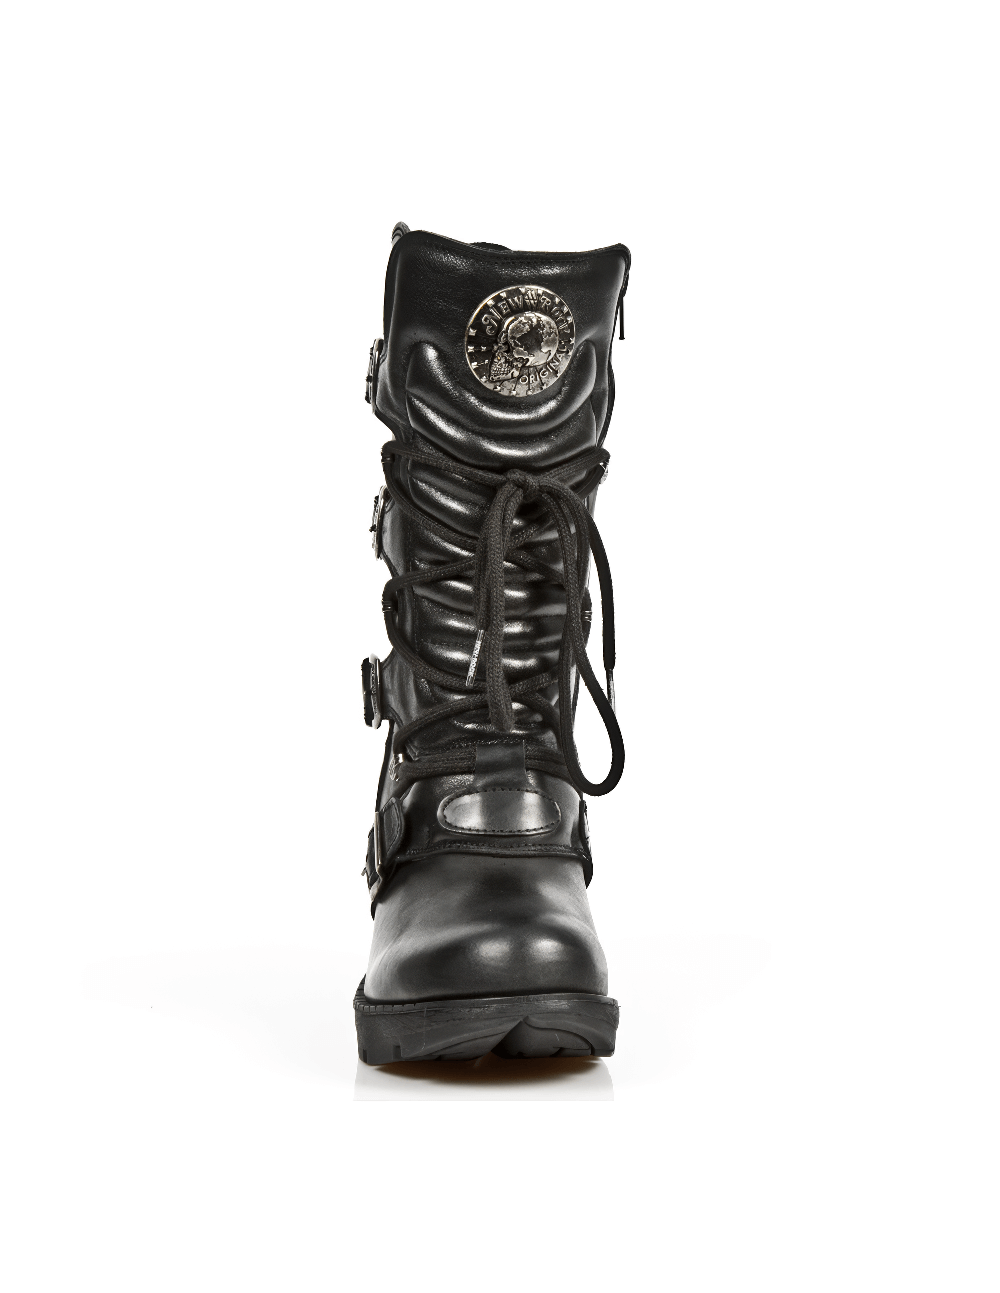 NEW ROCK Gothic Buckled Ankle Boots with Metallic Accents